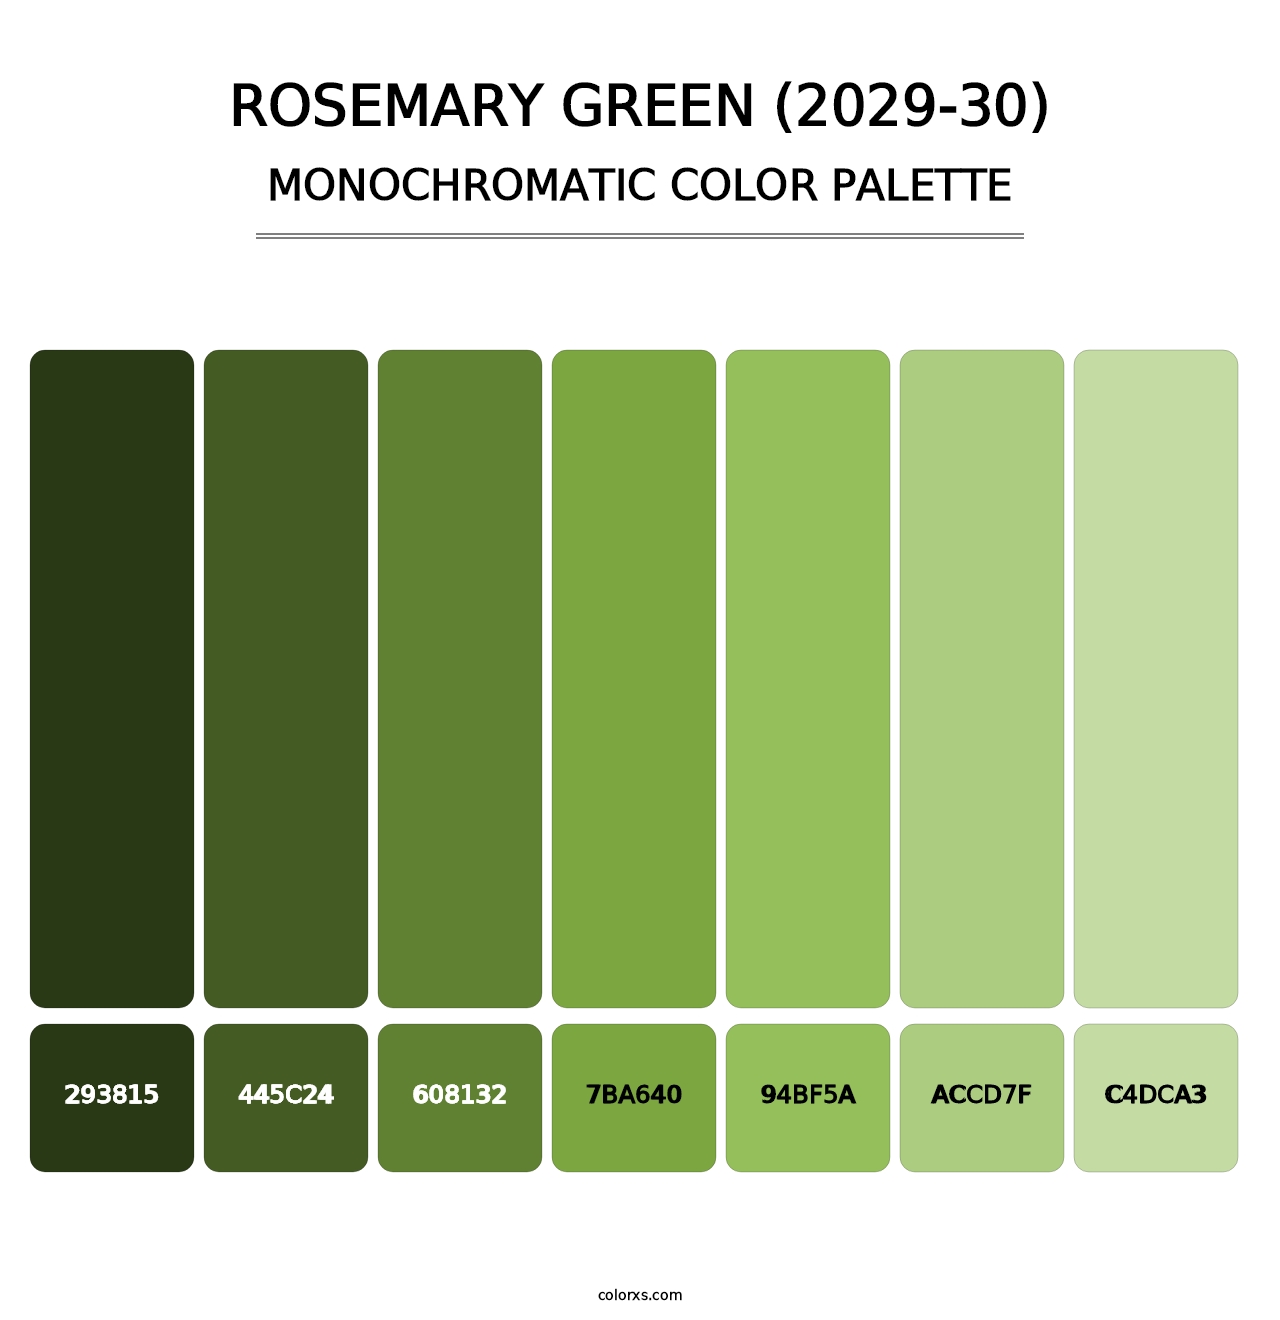 Rosemary Green (2029-30) - Monochromatic Color Palette